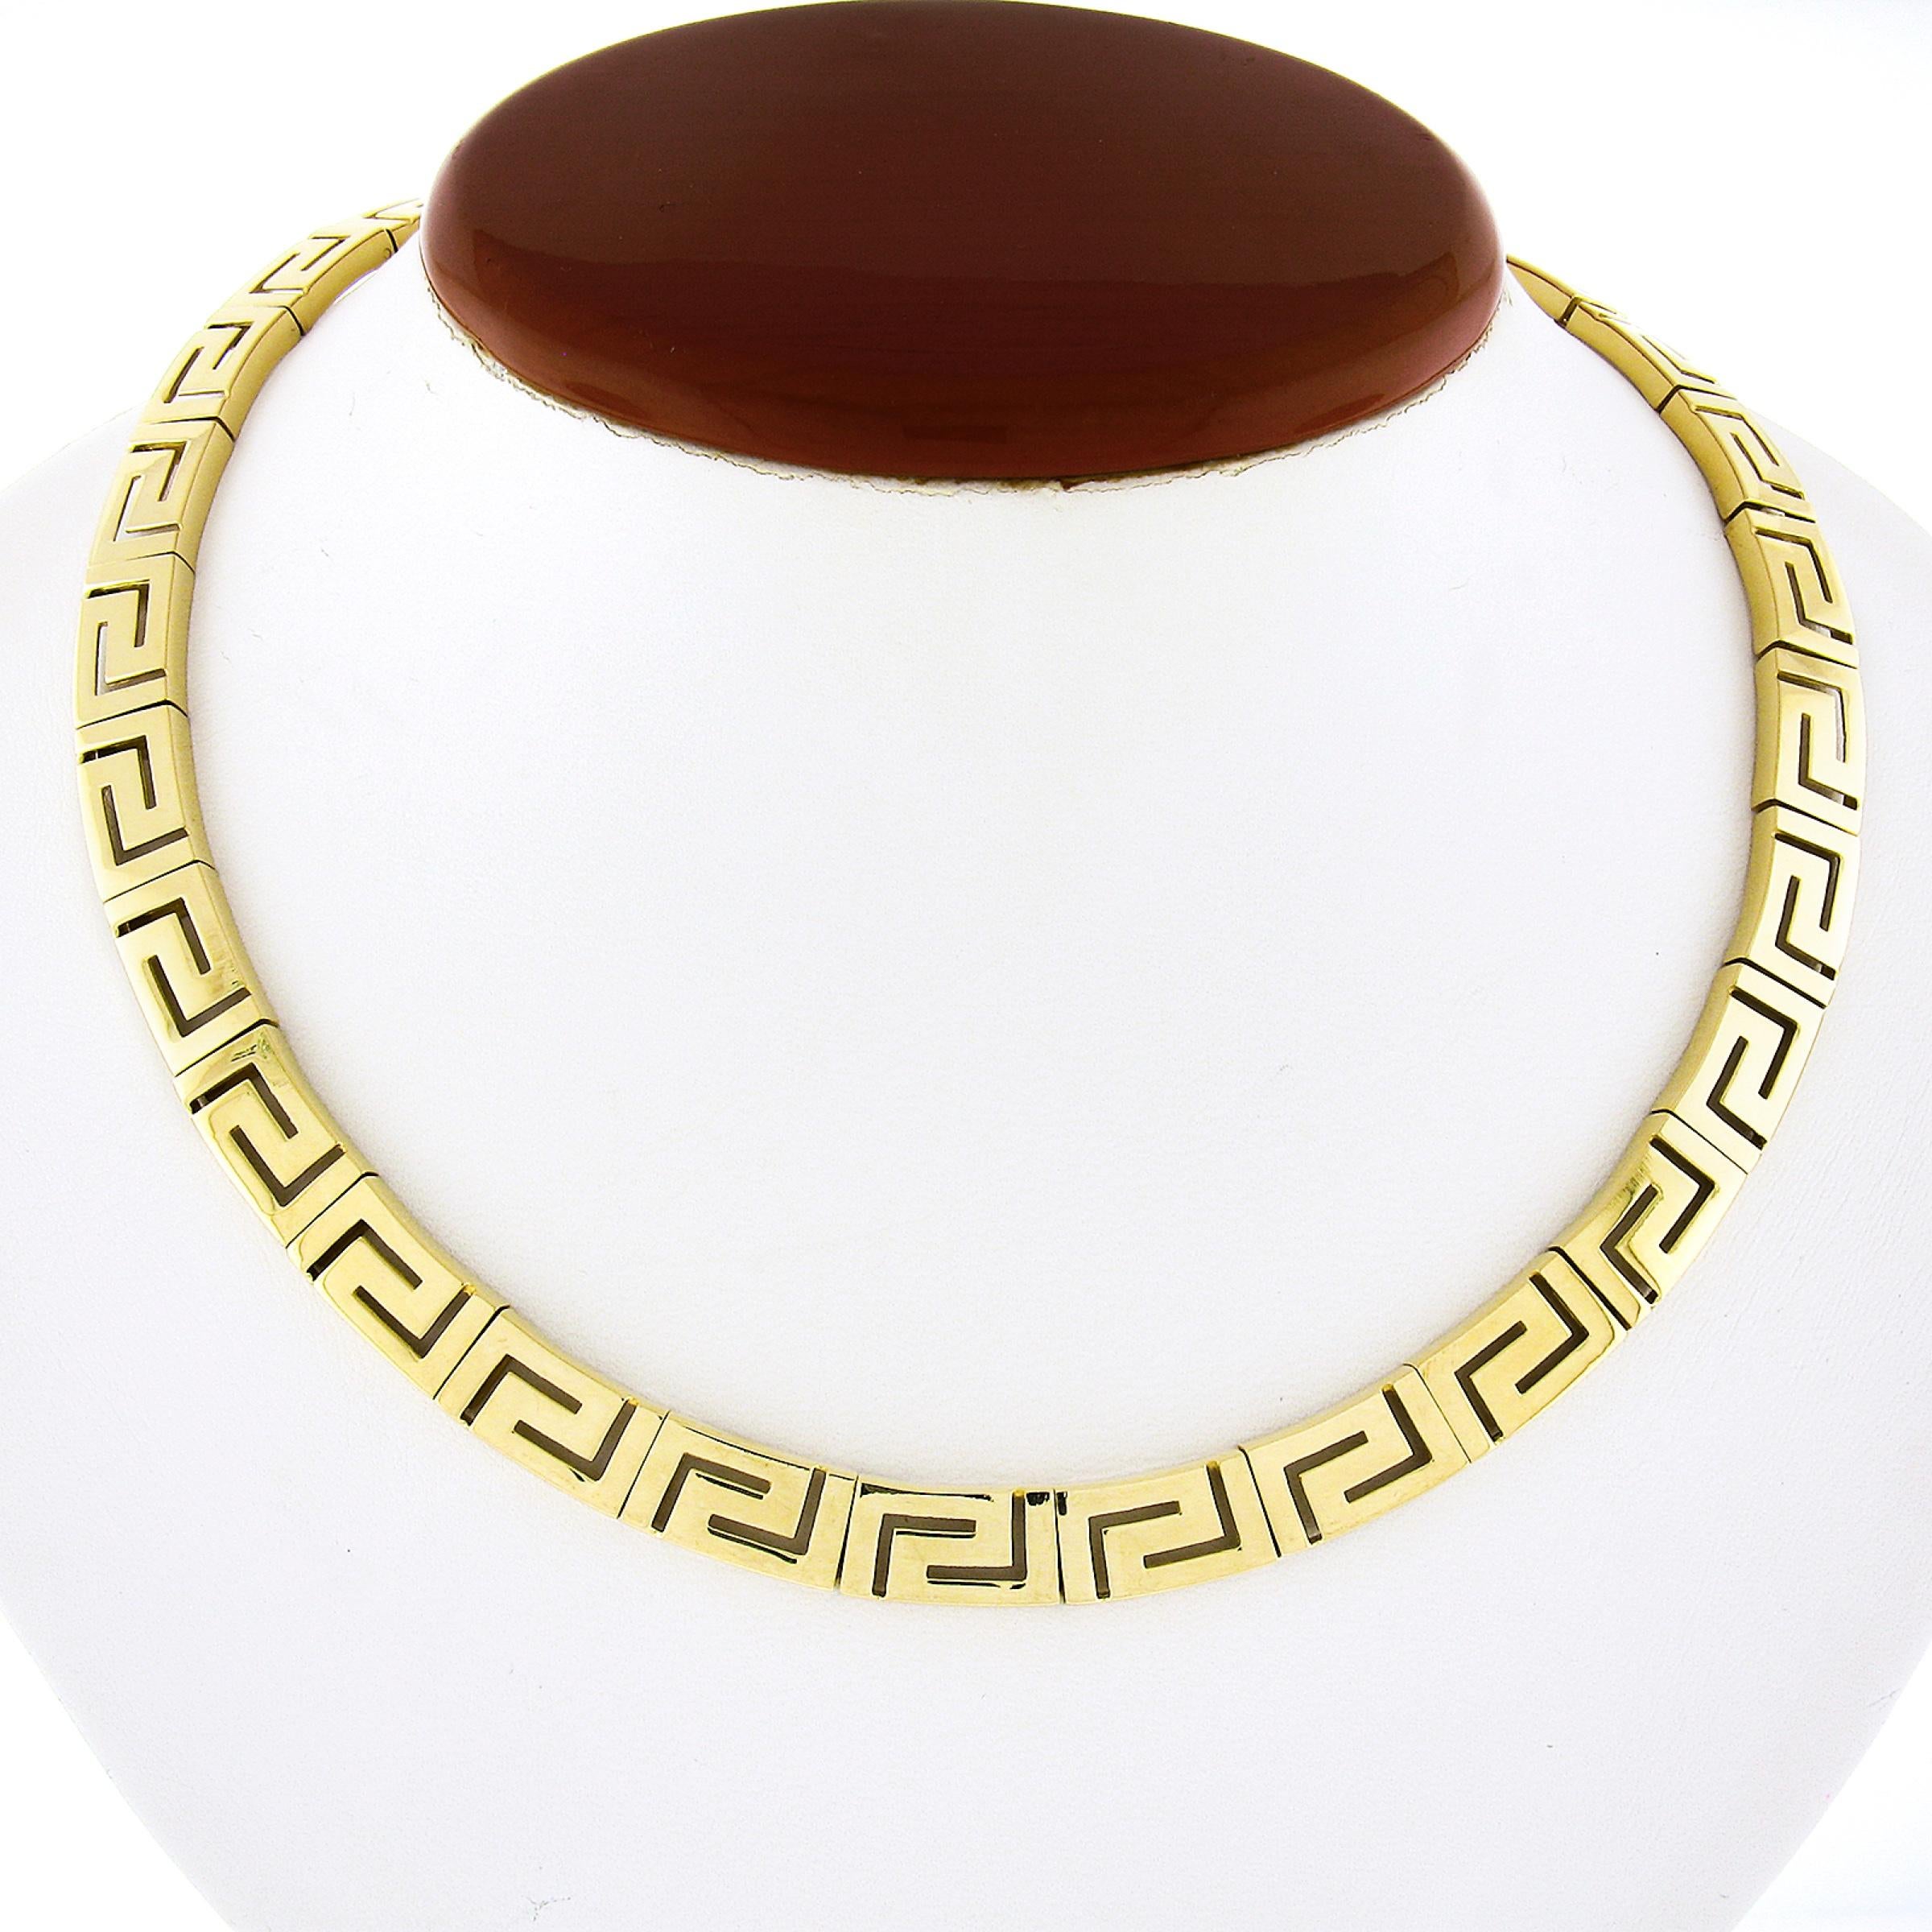 Here we have a fancy and very well made collar statement necklace that was crafted from solid 18k yellow gold. This beautiful chain is constructed from gorgeous open work Greek Key design links that have a wonderful high polished finish throughout